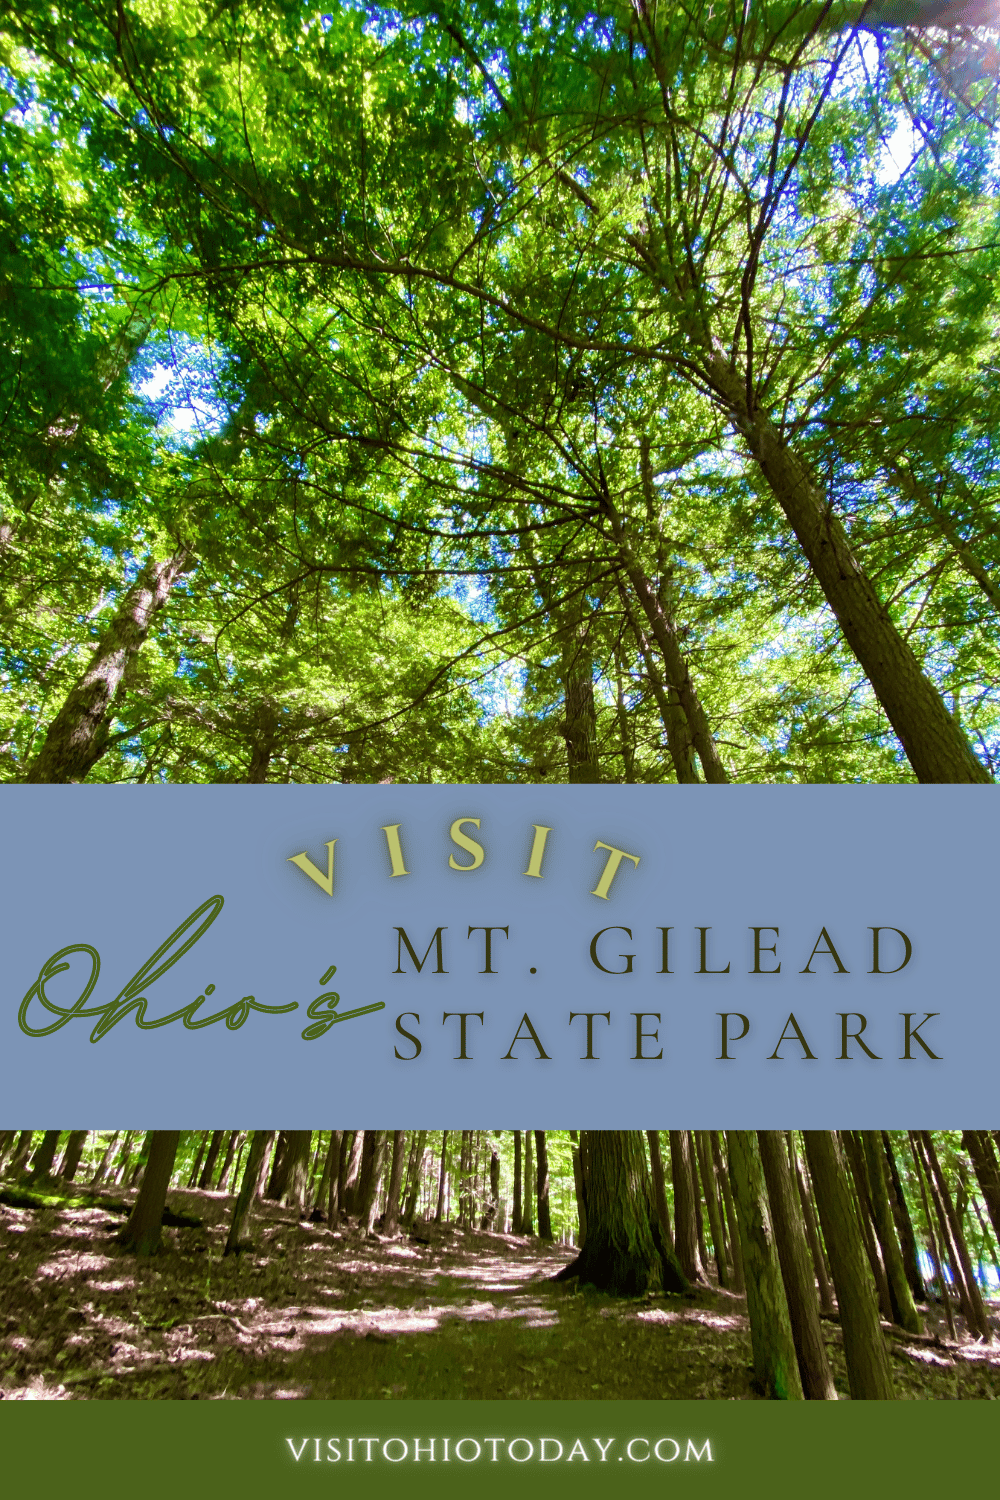 Vertical photo of trees. Text overlay says visit Ohio's mt. gilead state park